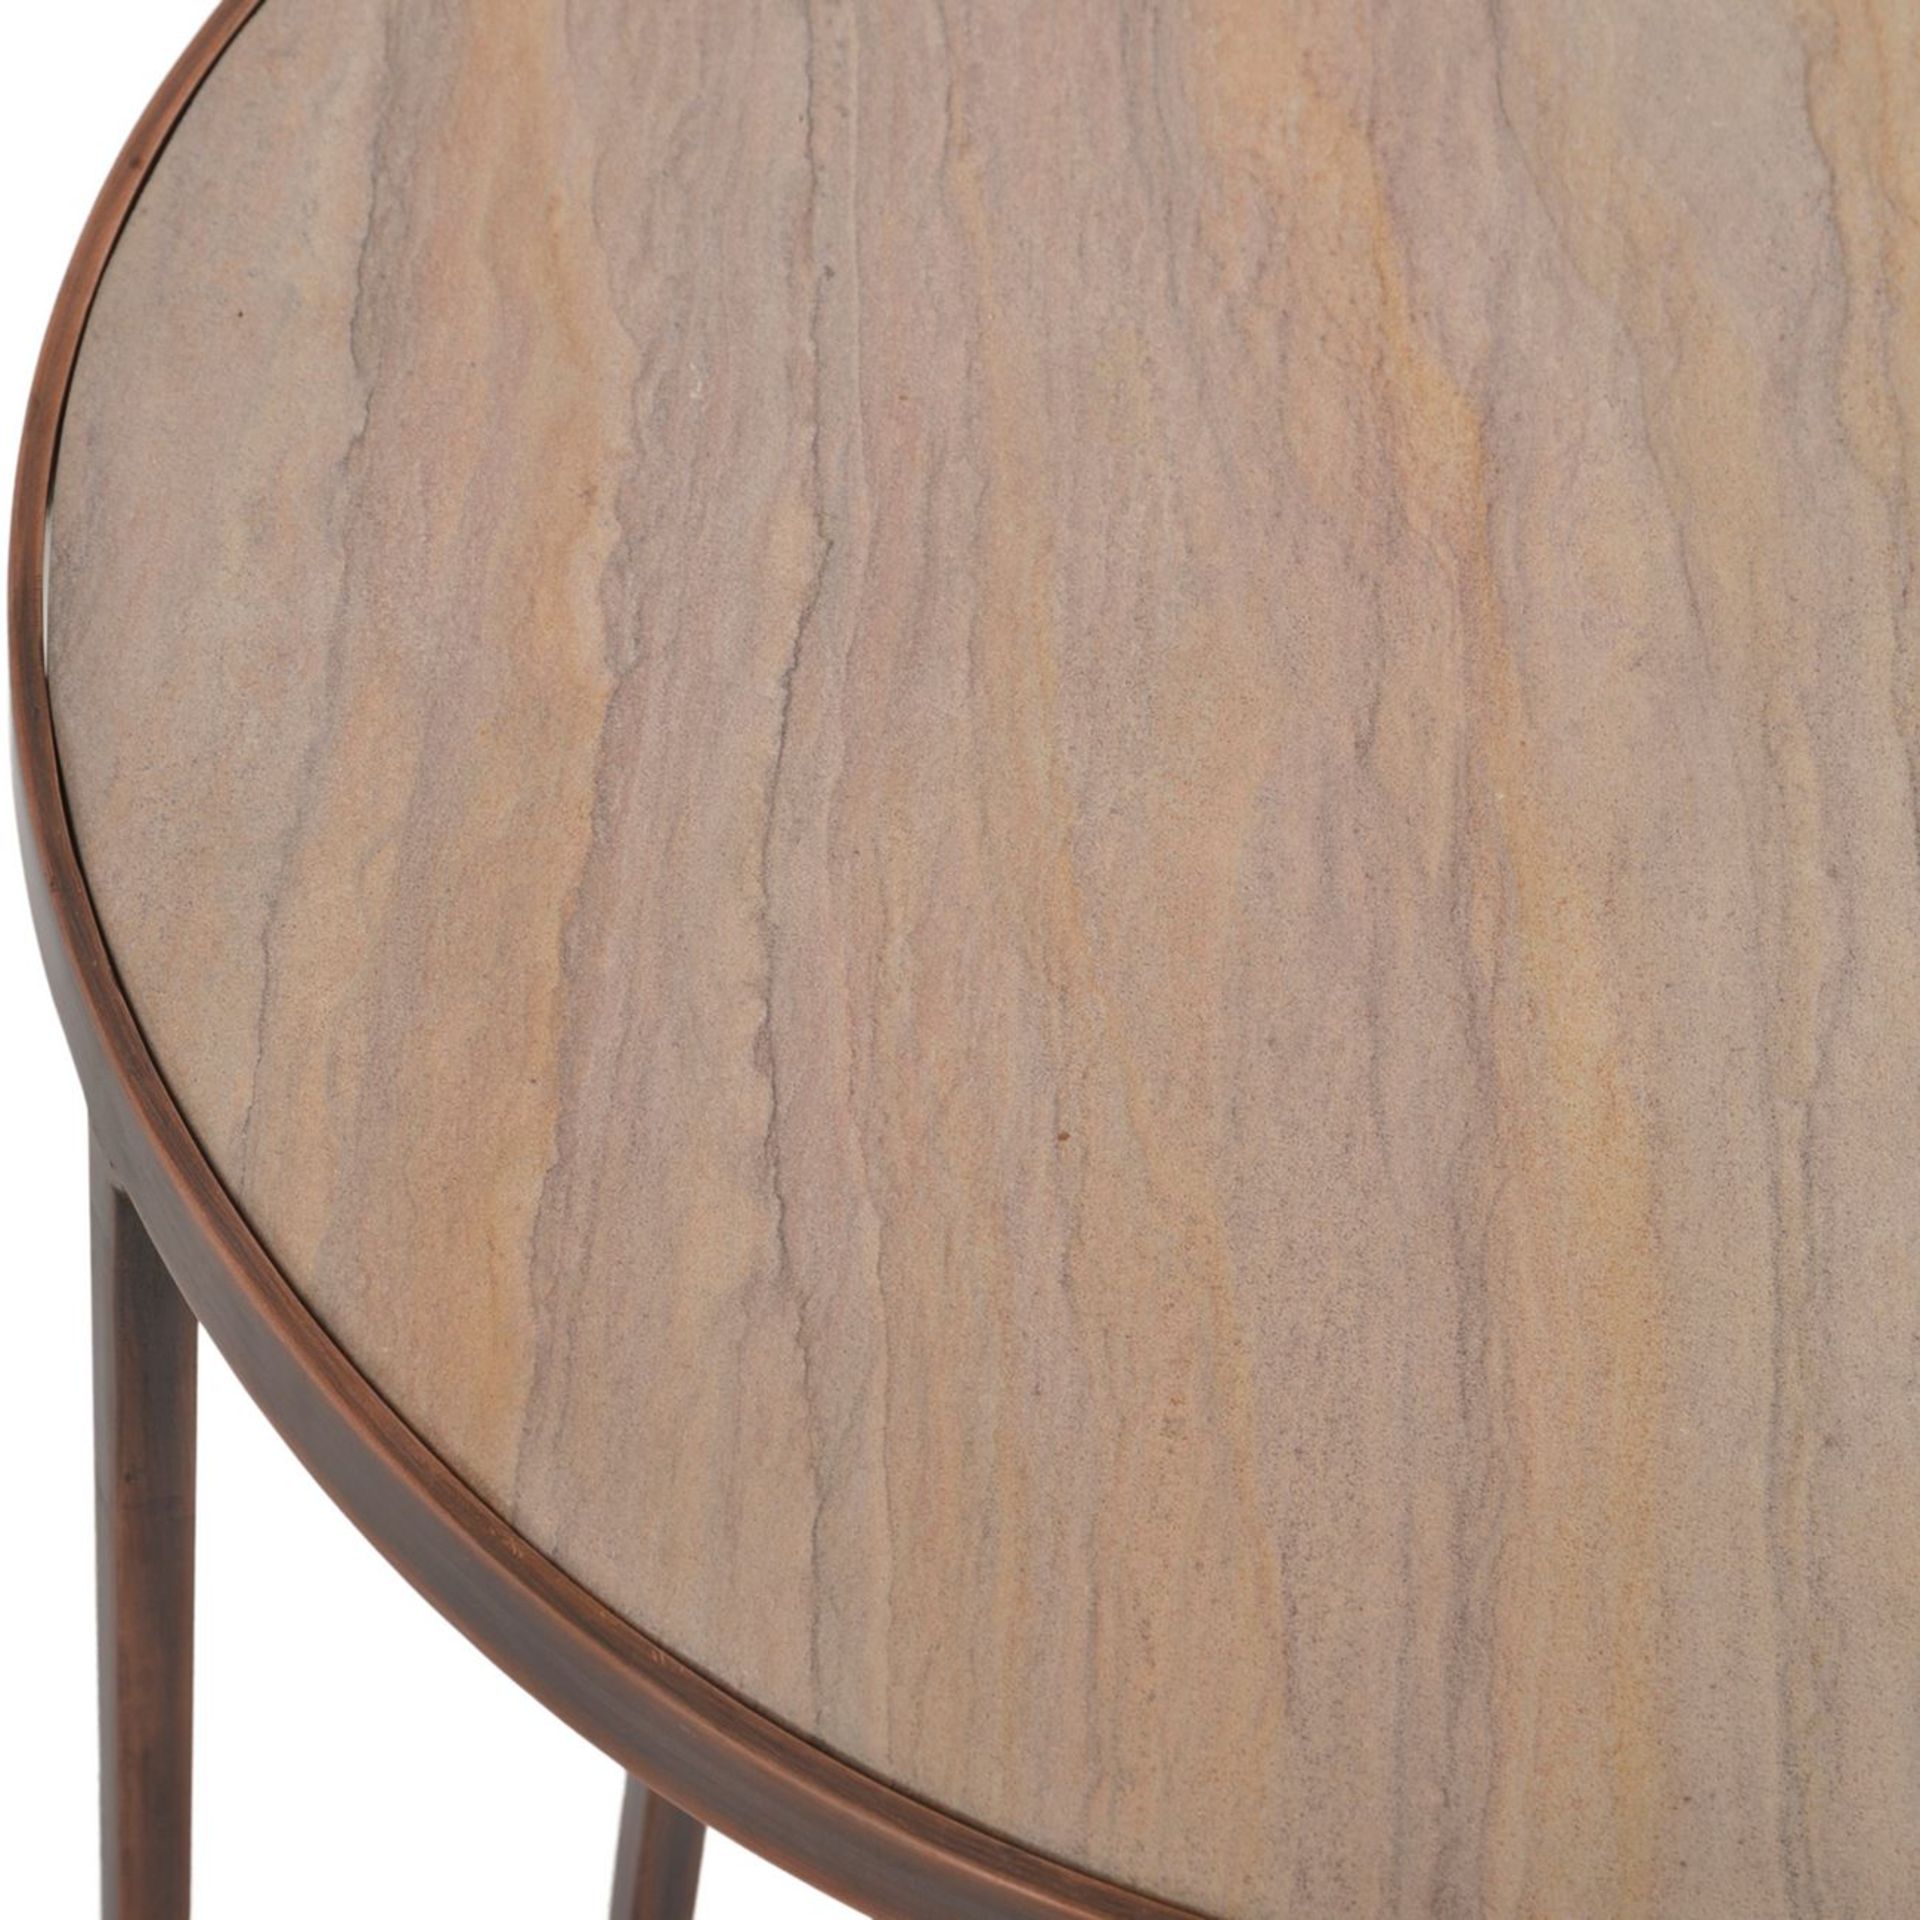 Alpina Sandstone and Metal Side Table - Image 2 of 2